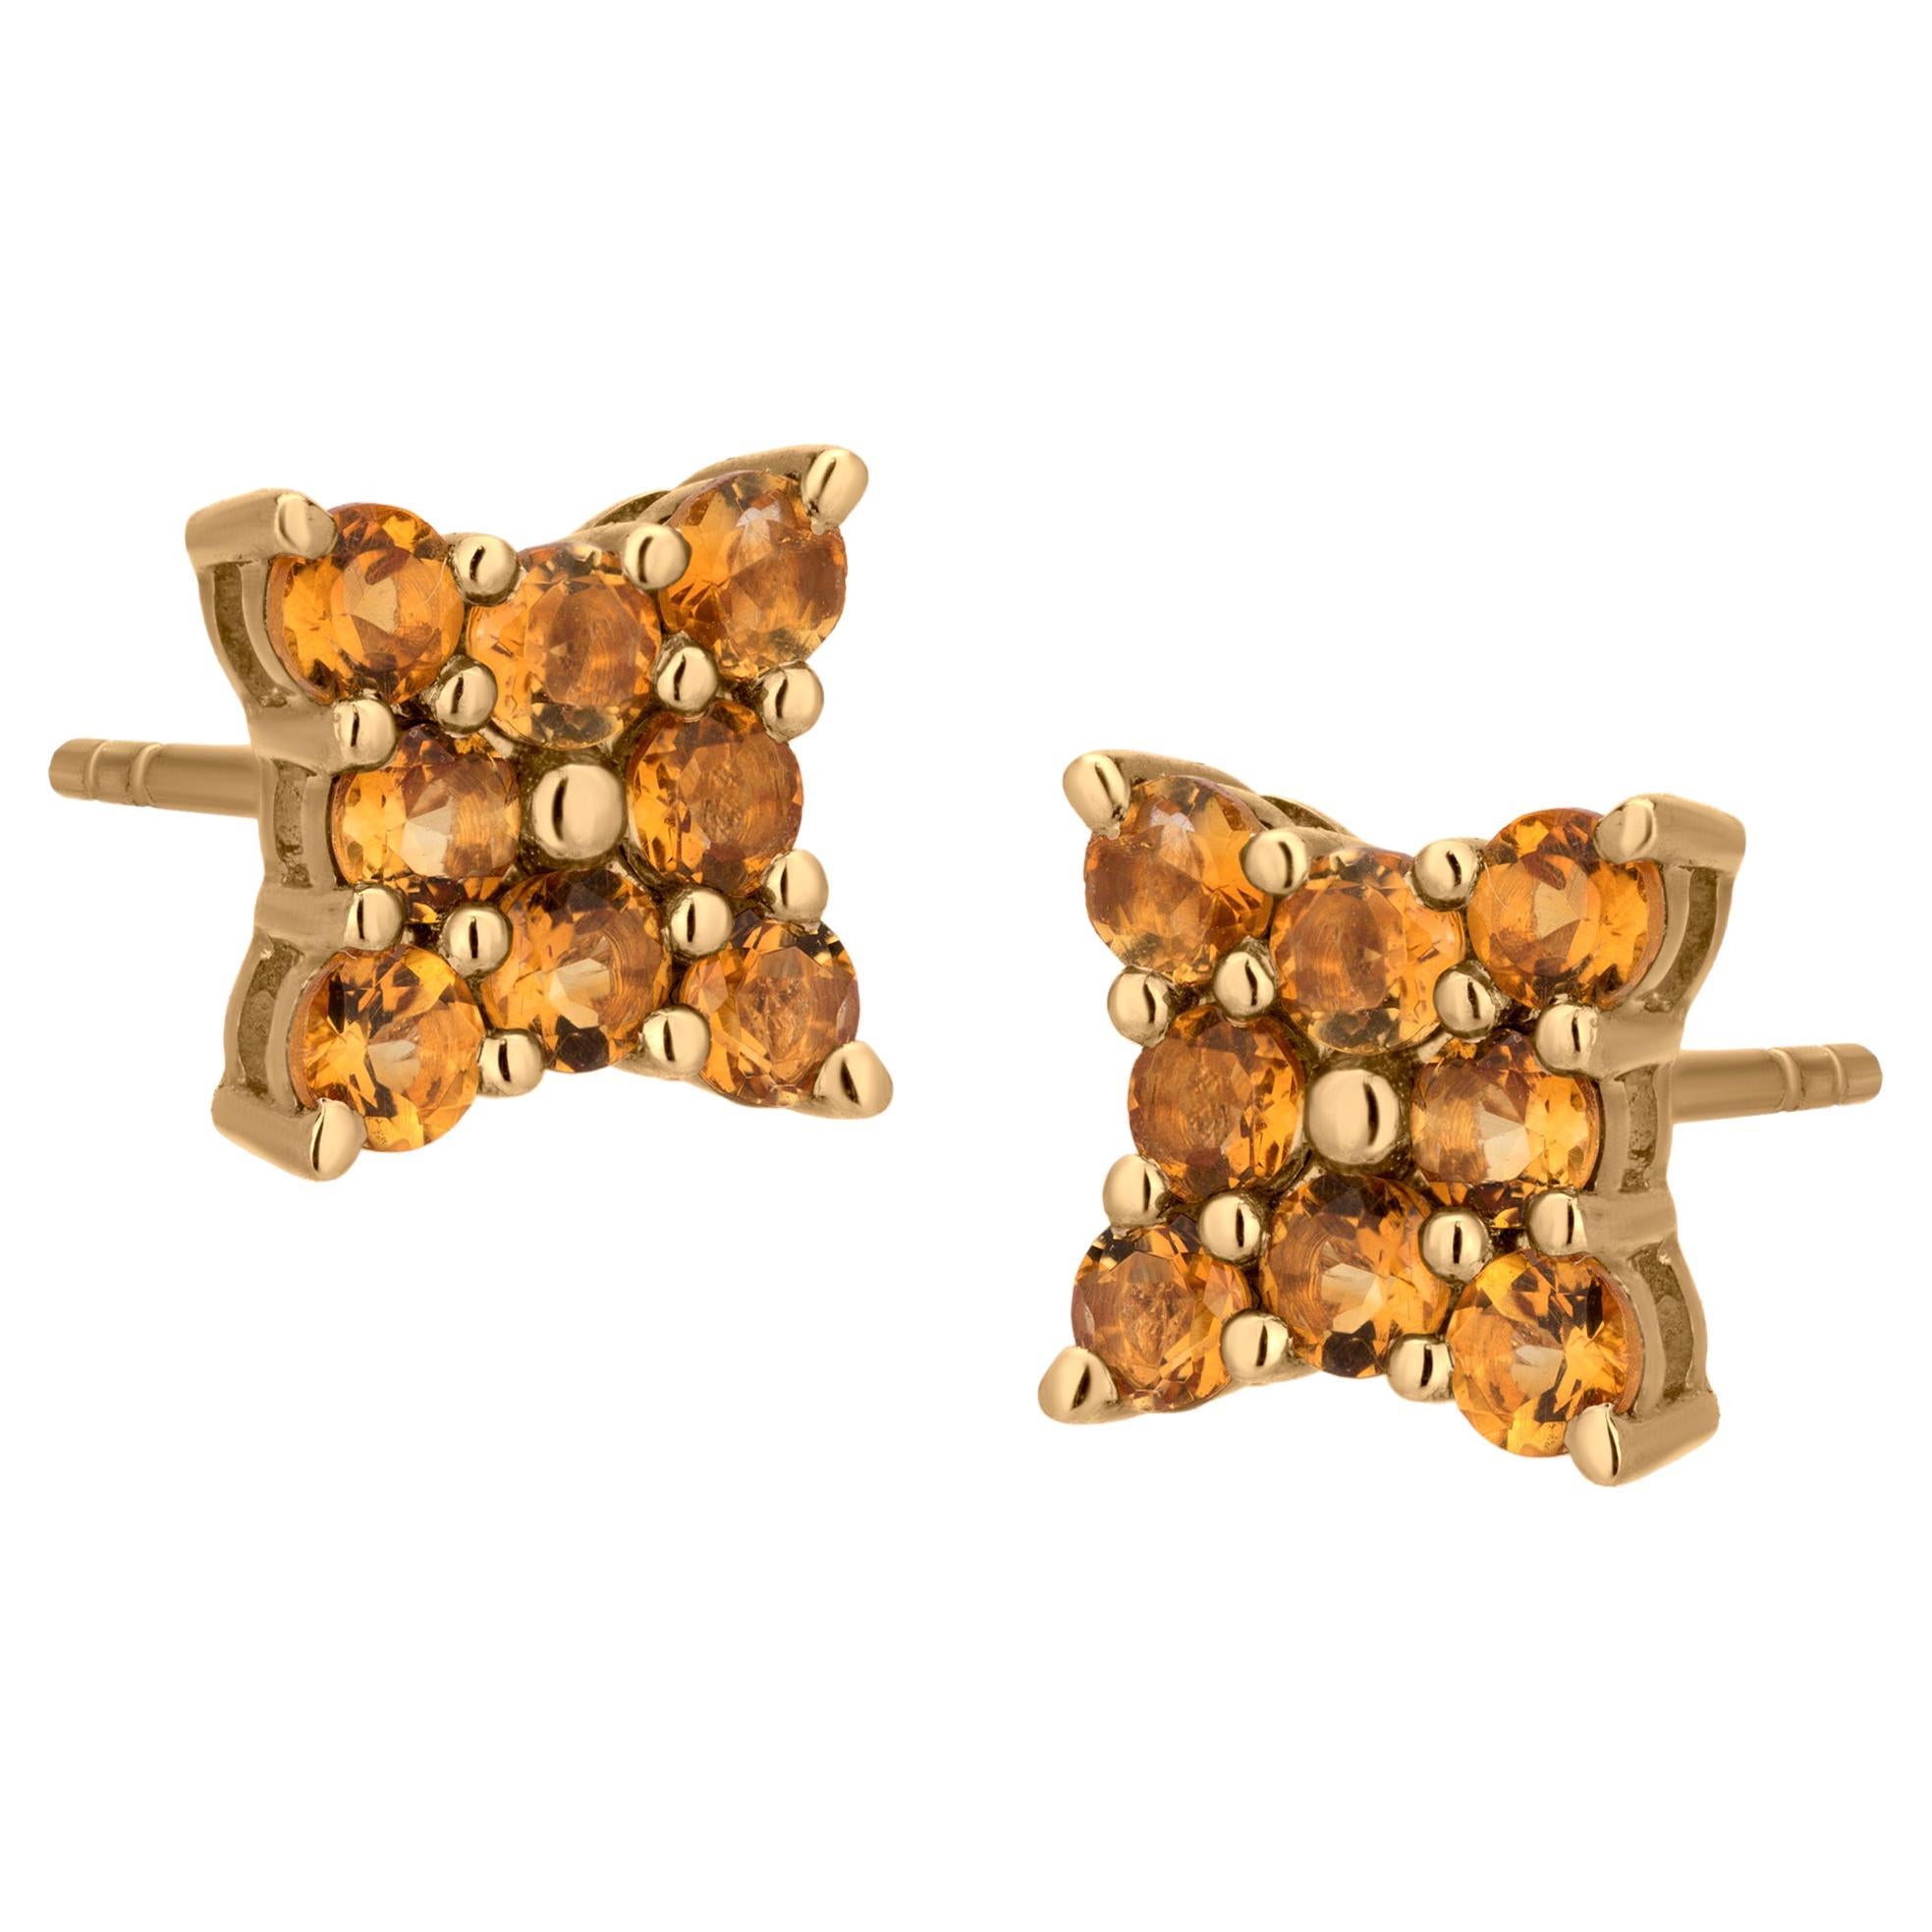 Gemistry 0.85cttw Round Citrine Stud Earrings in 14k Yellow Gold For Sale